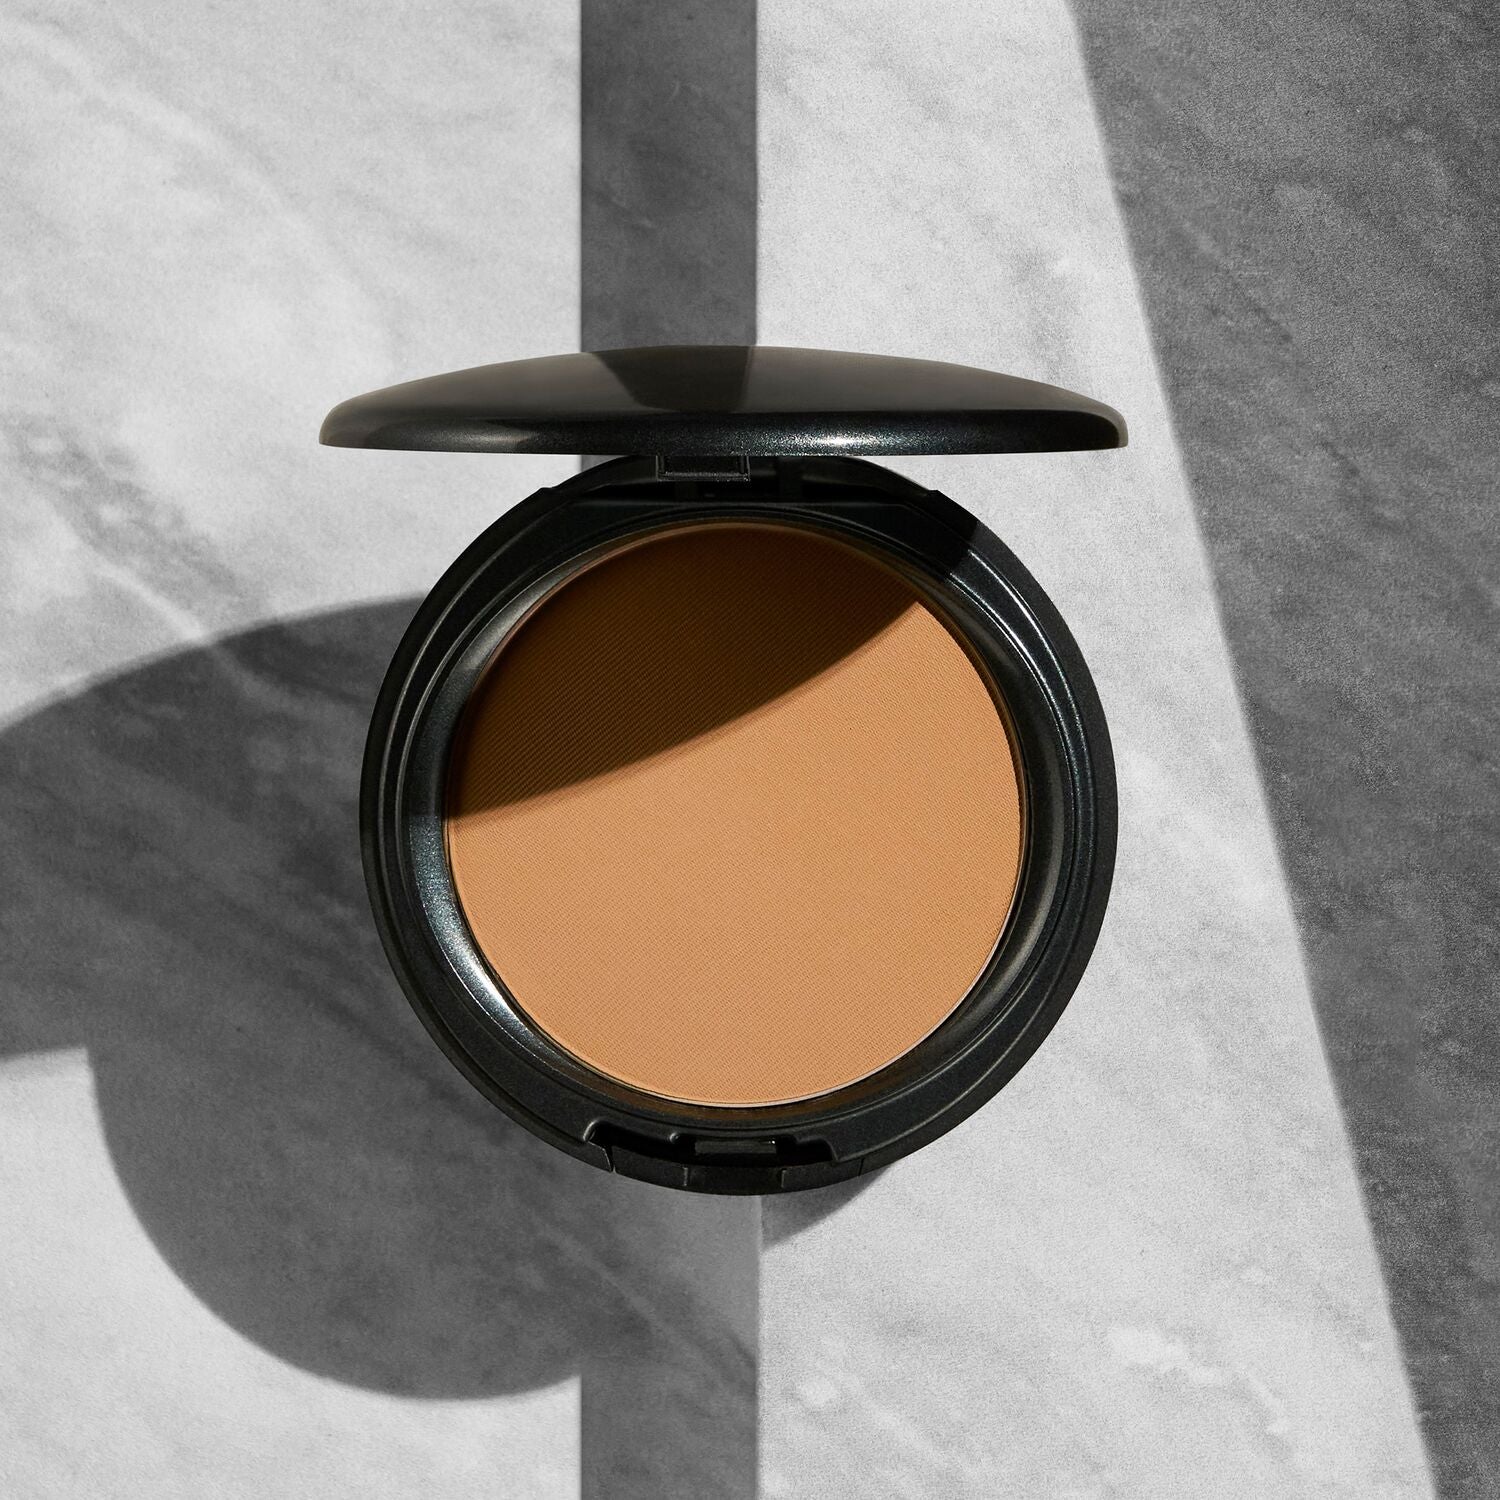 Coverfx Pressed Mineral Foundation in shade M5